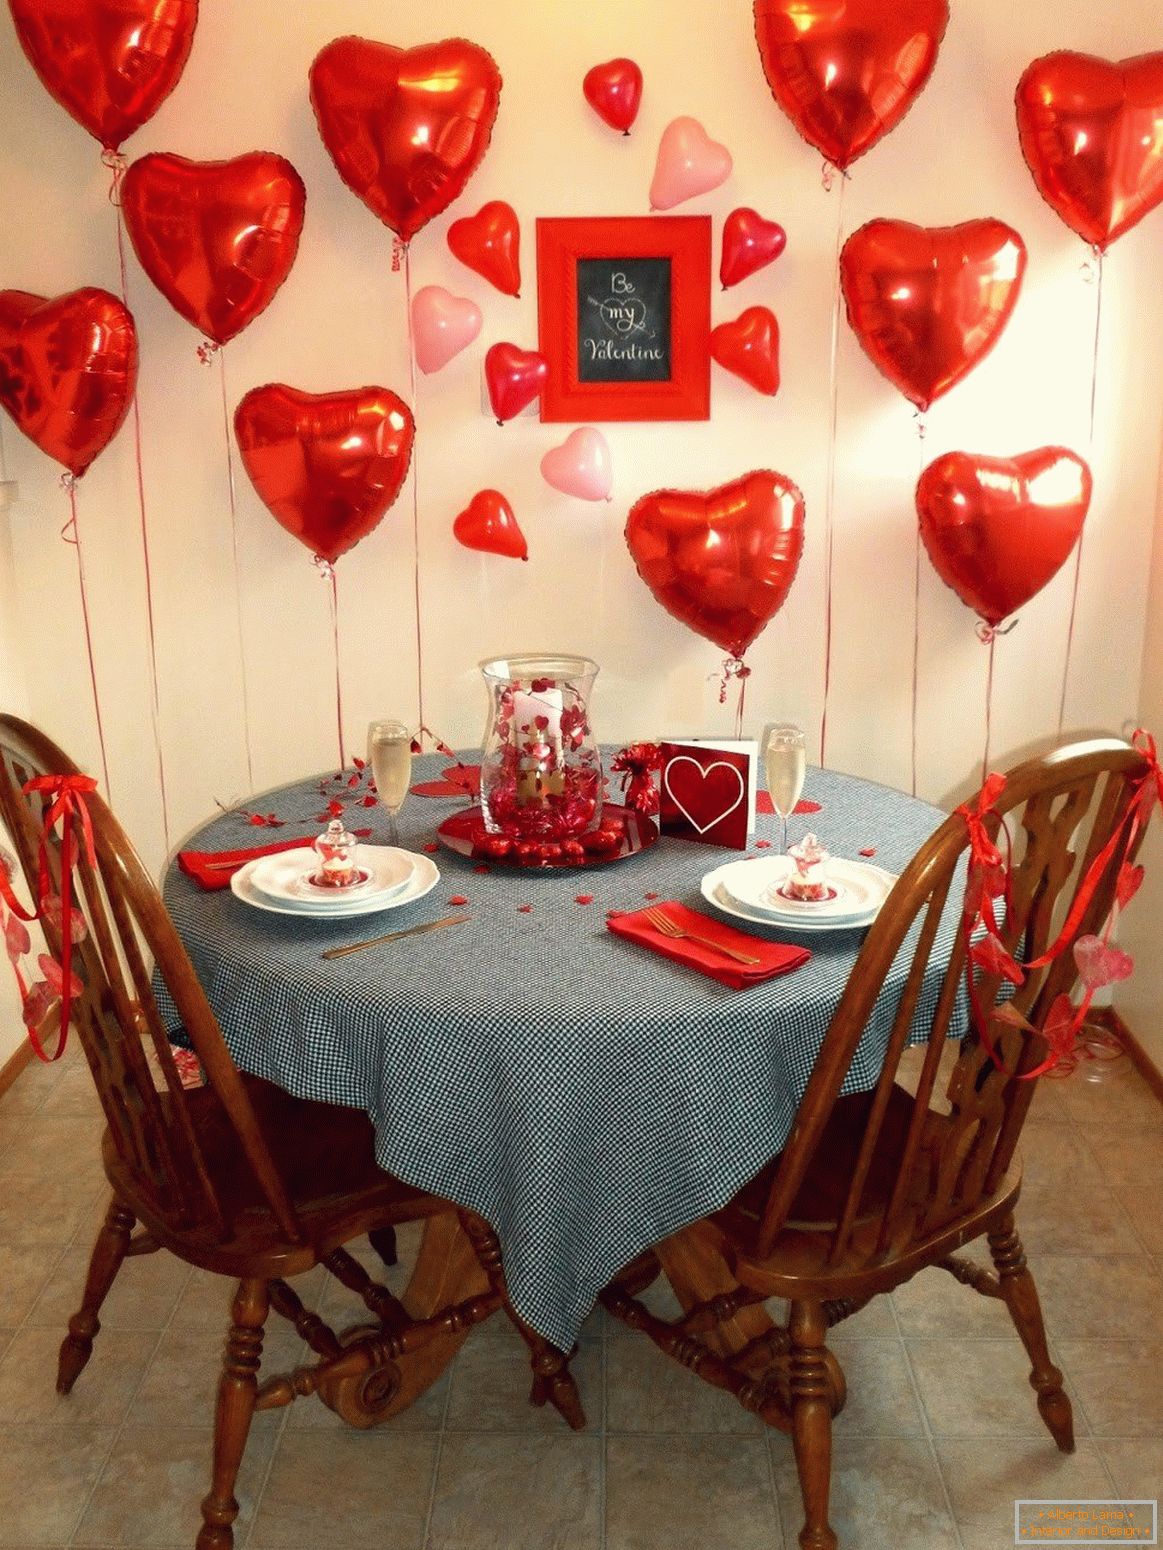 Decorating the room for a romantic dinner